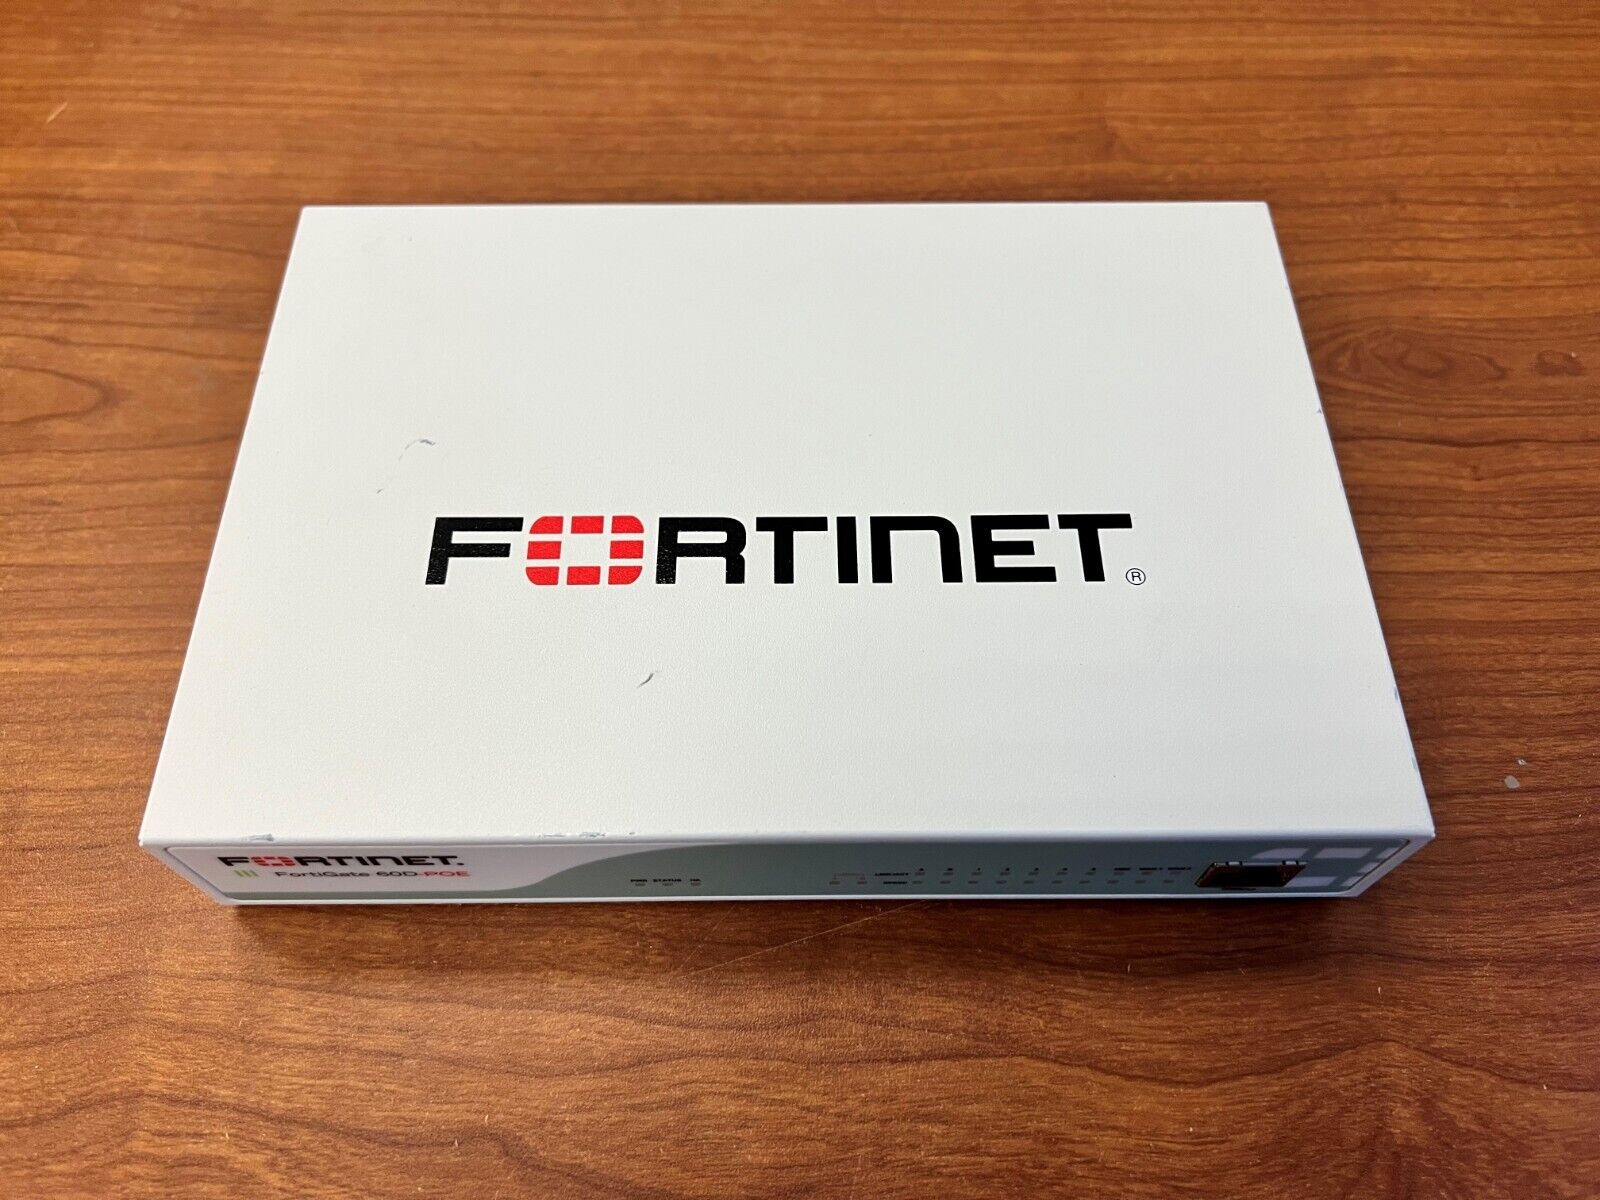 Fortinet FortiGate FG-60D-POE Firewall Used